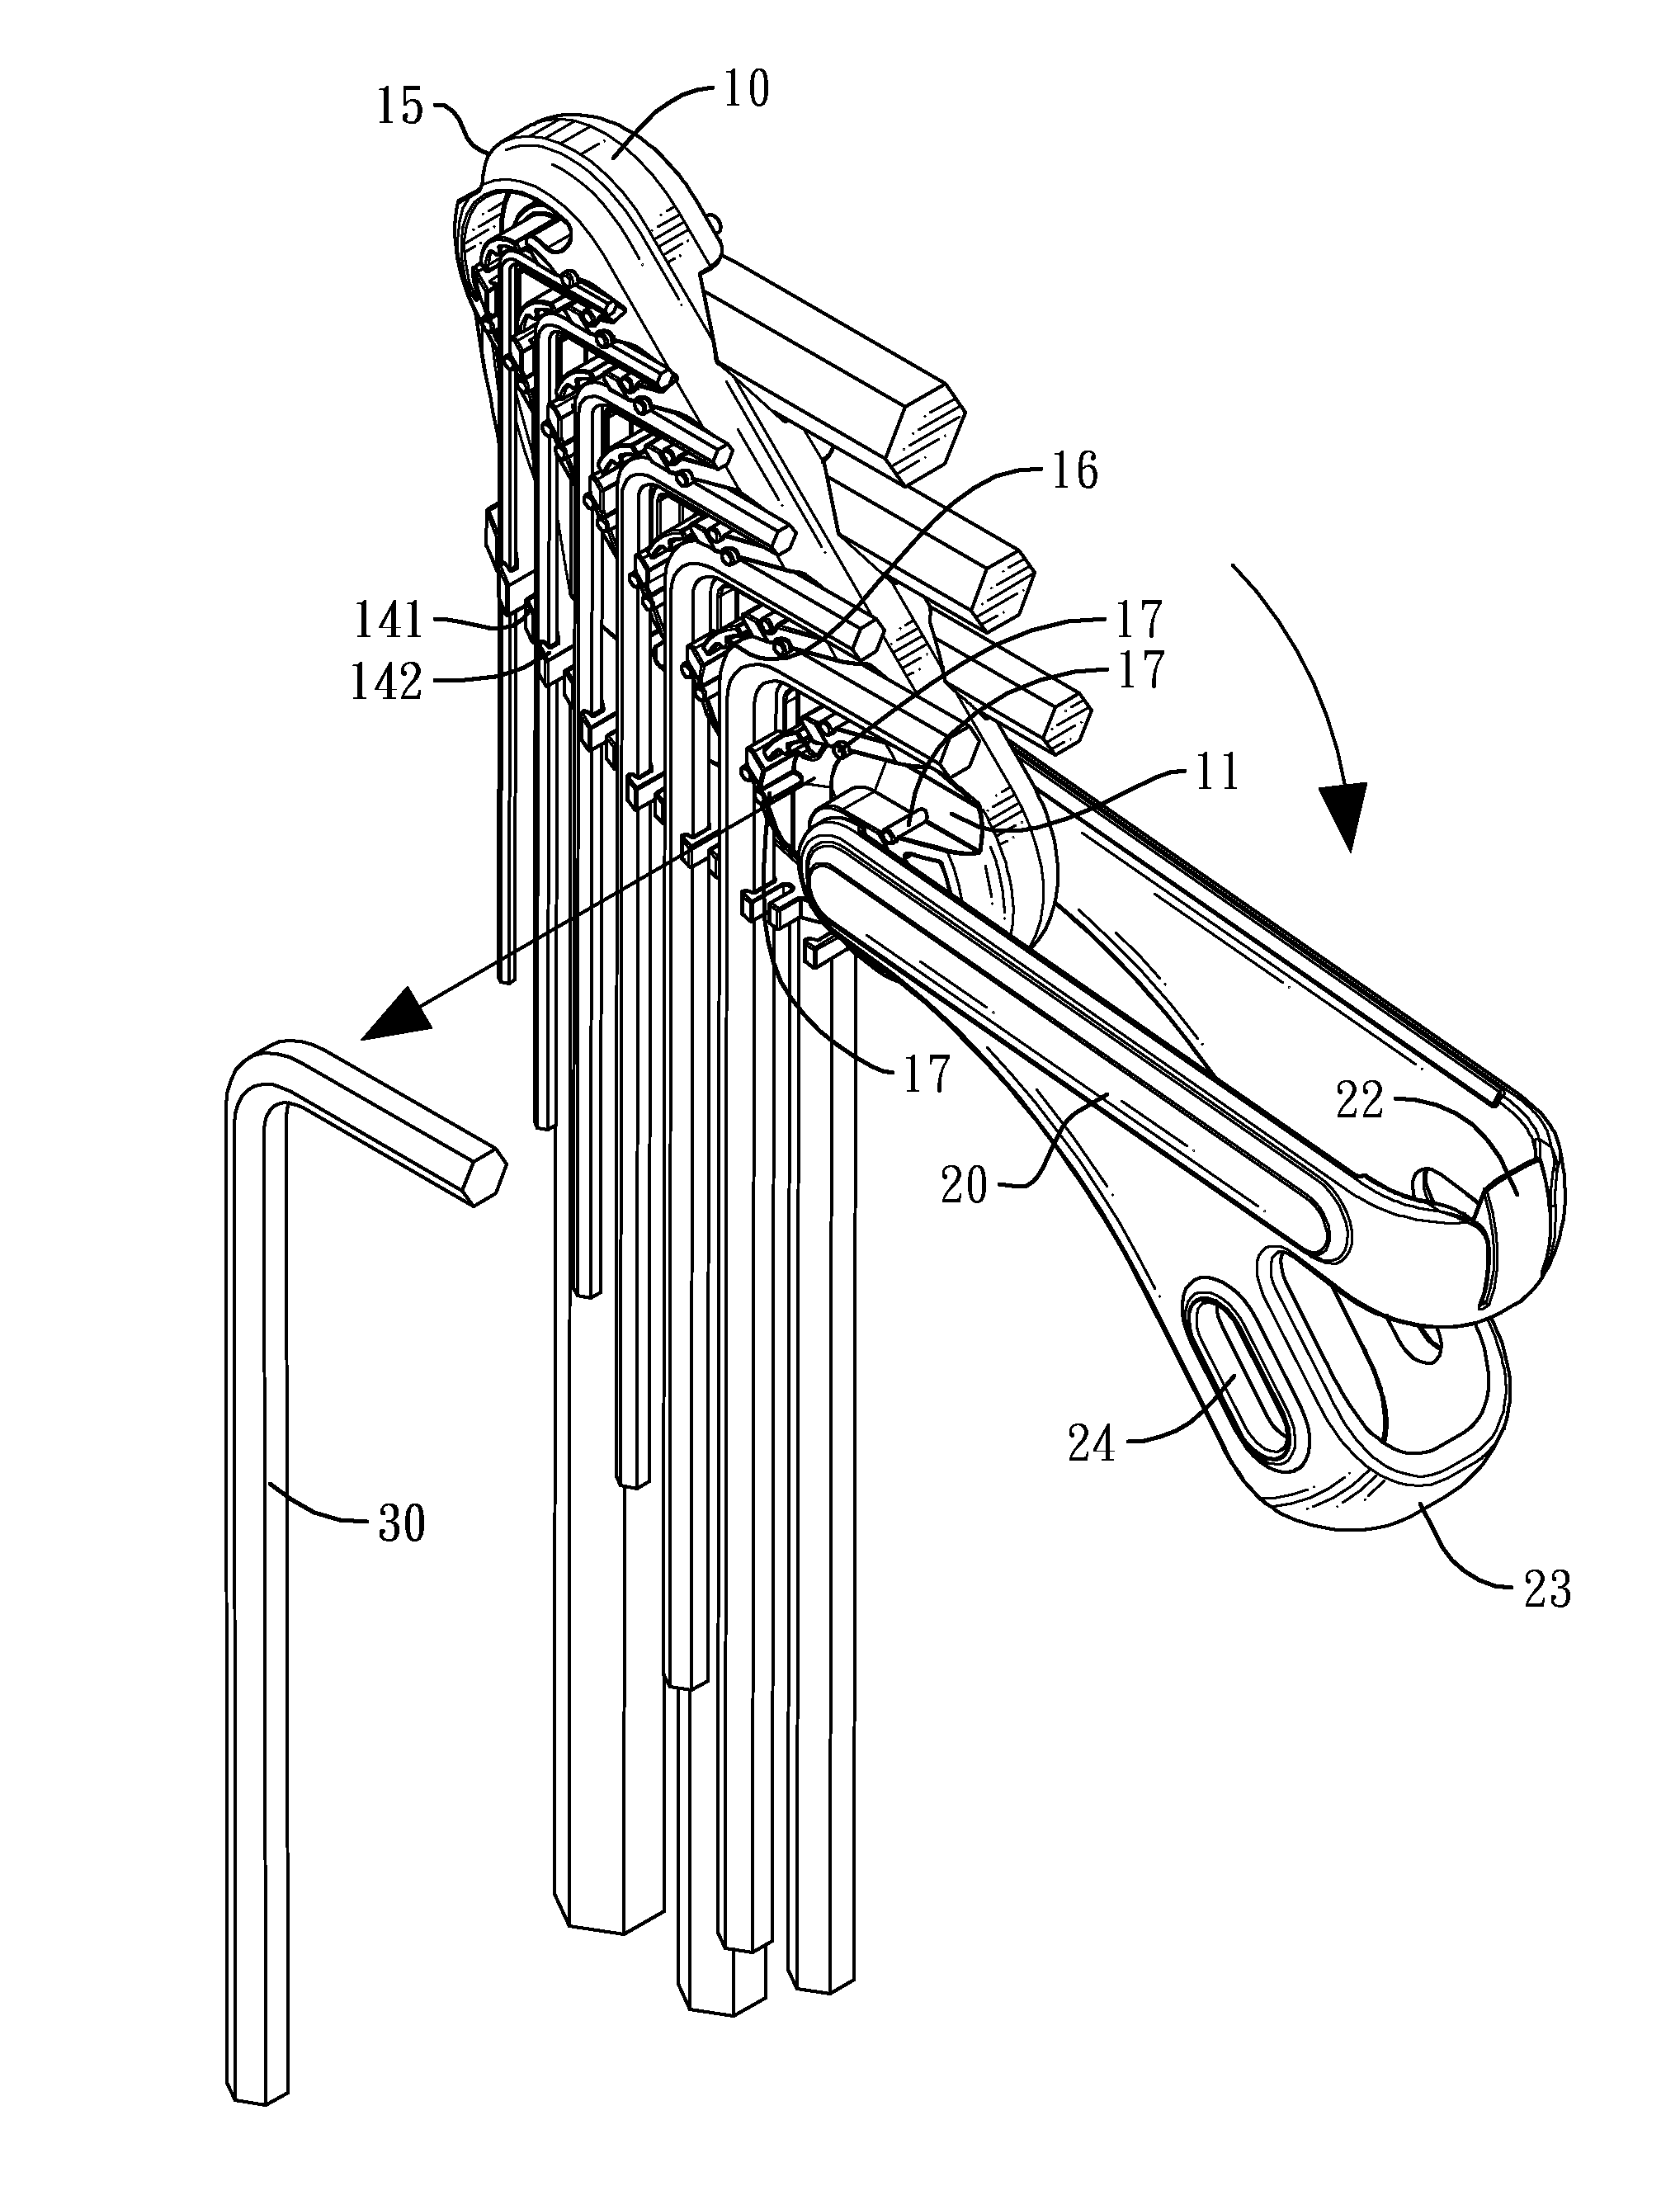 Hexagonal wrench holding assembly